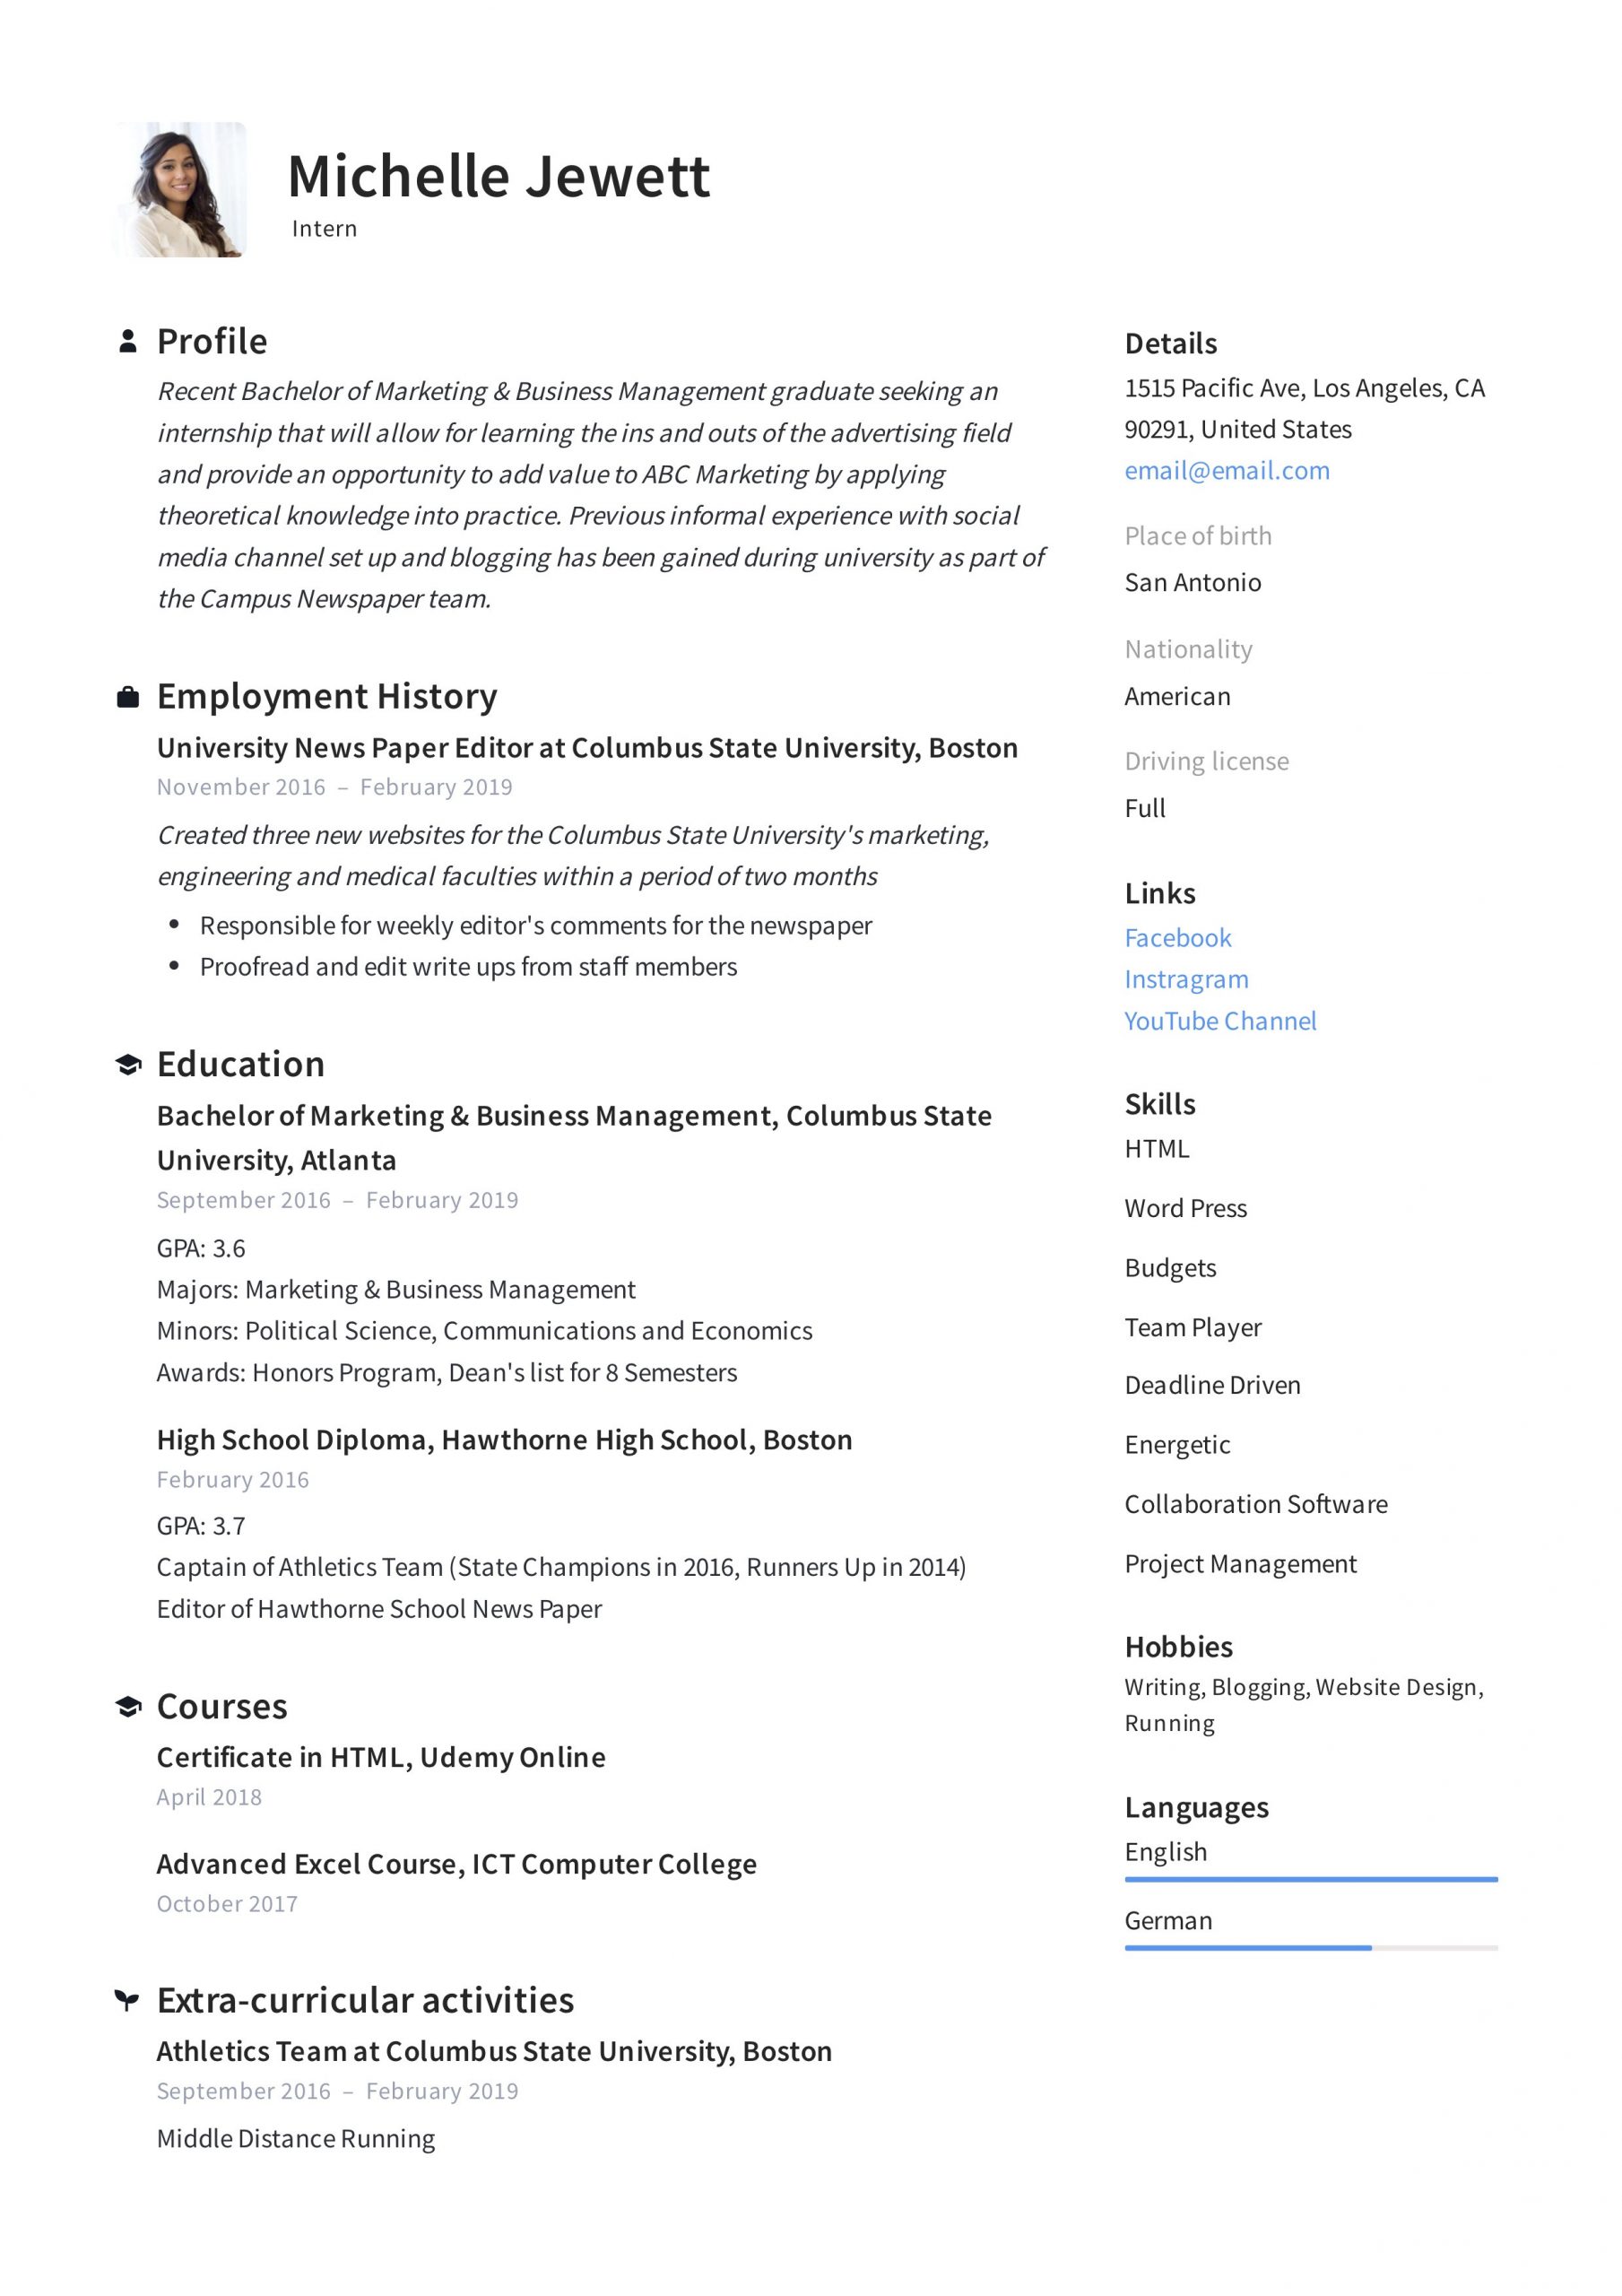 College Student Resume for Internship Template Intern Resume & Writing Guide   12 Samples Pdf 2020